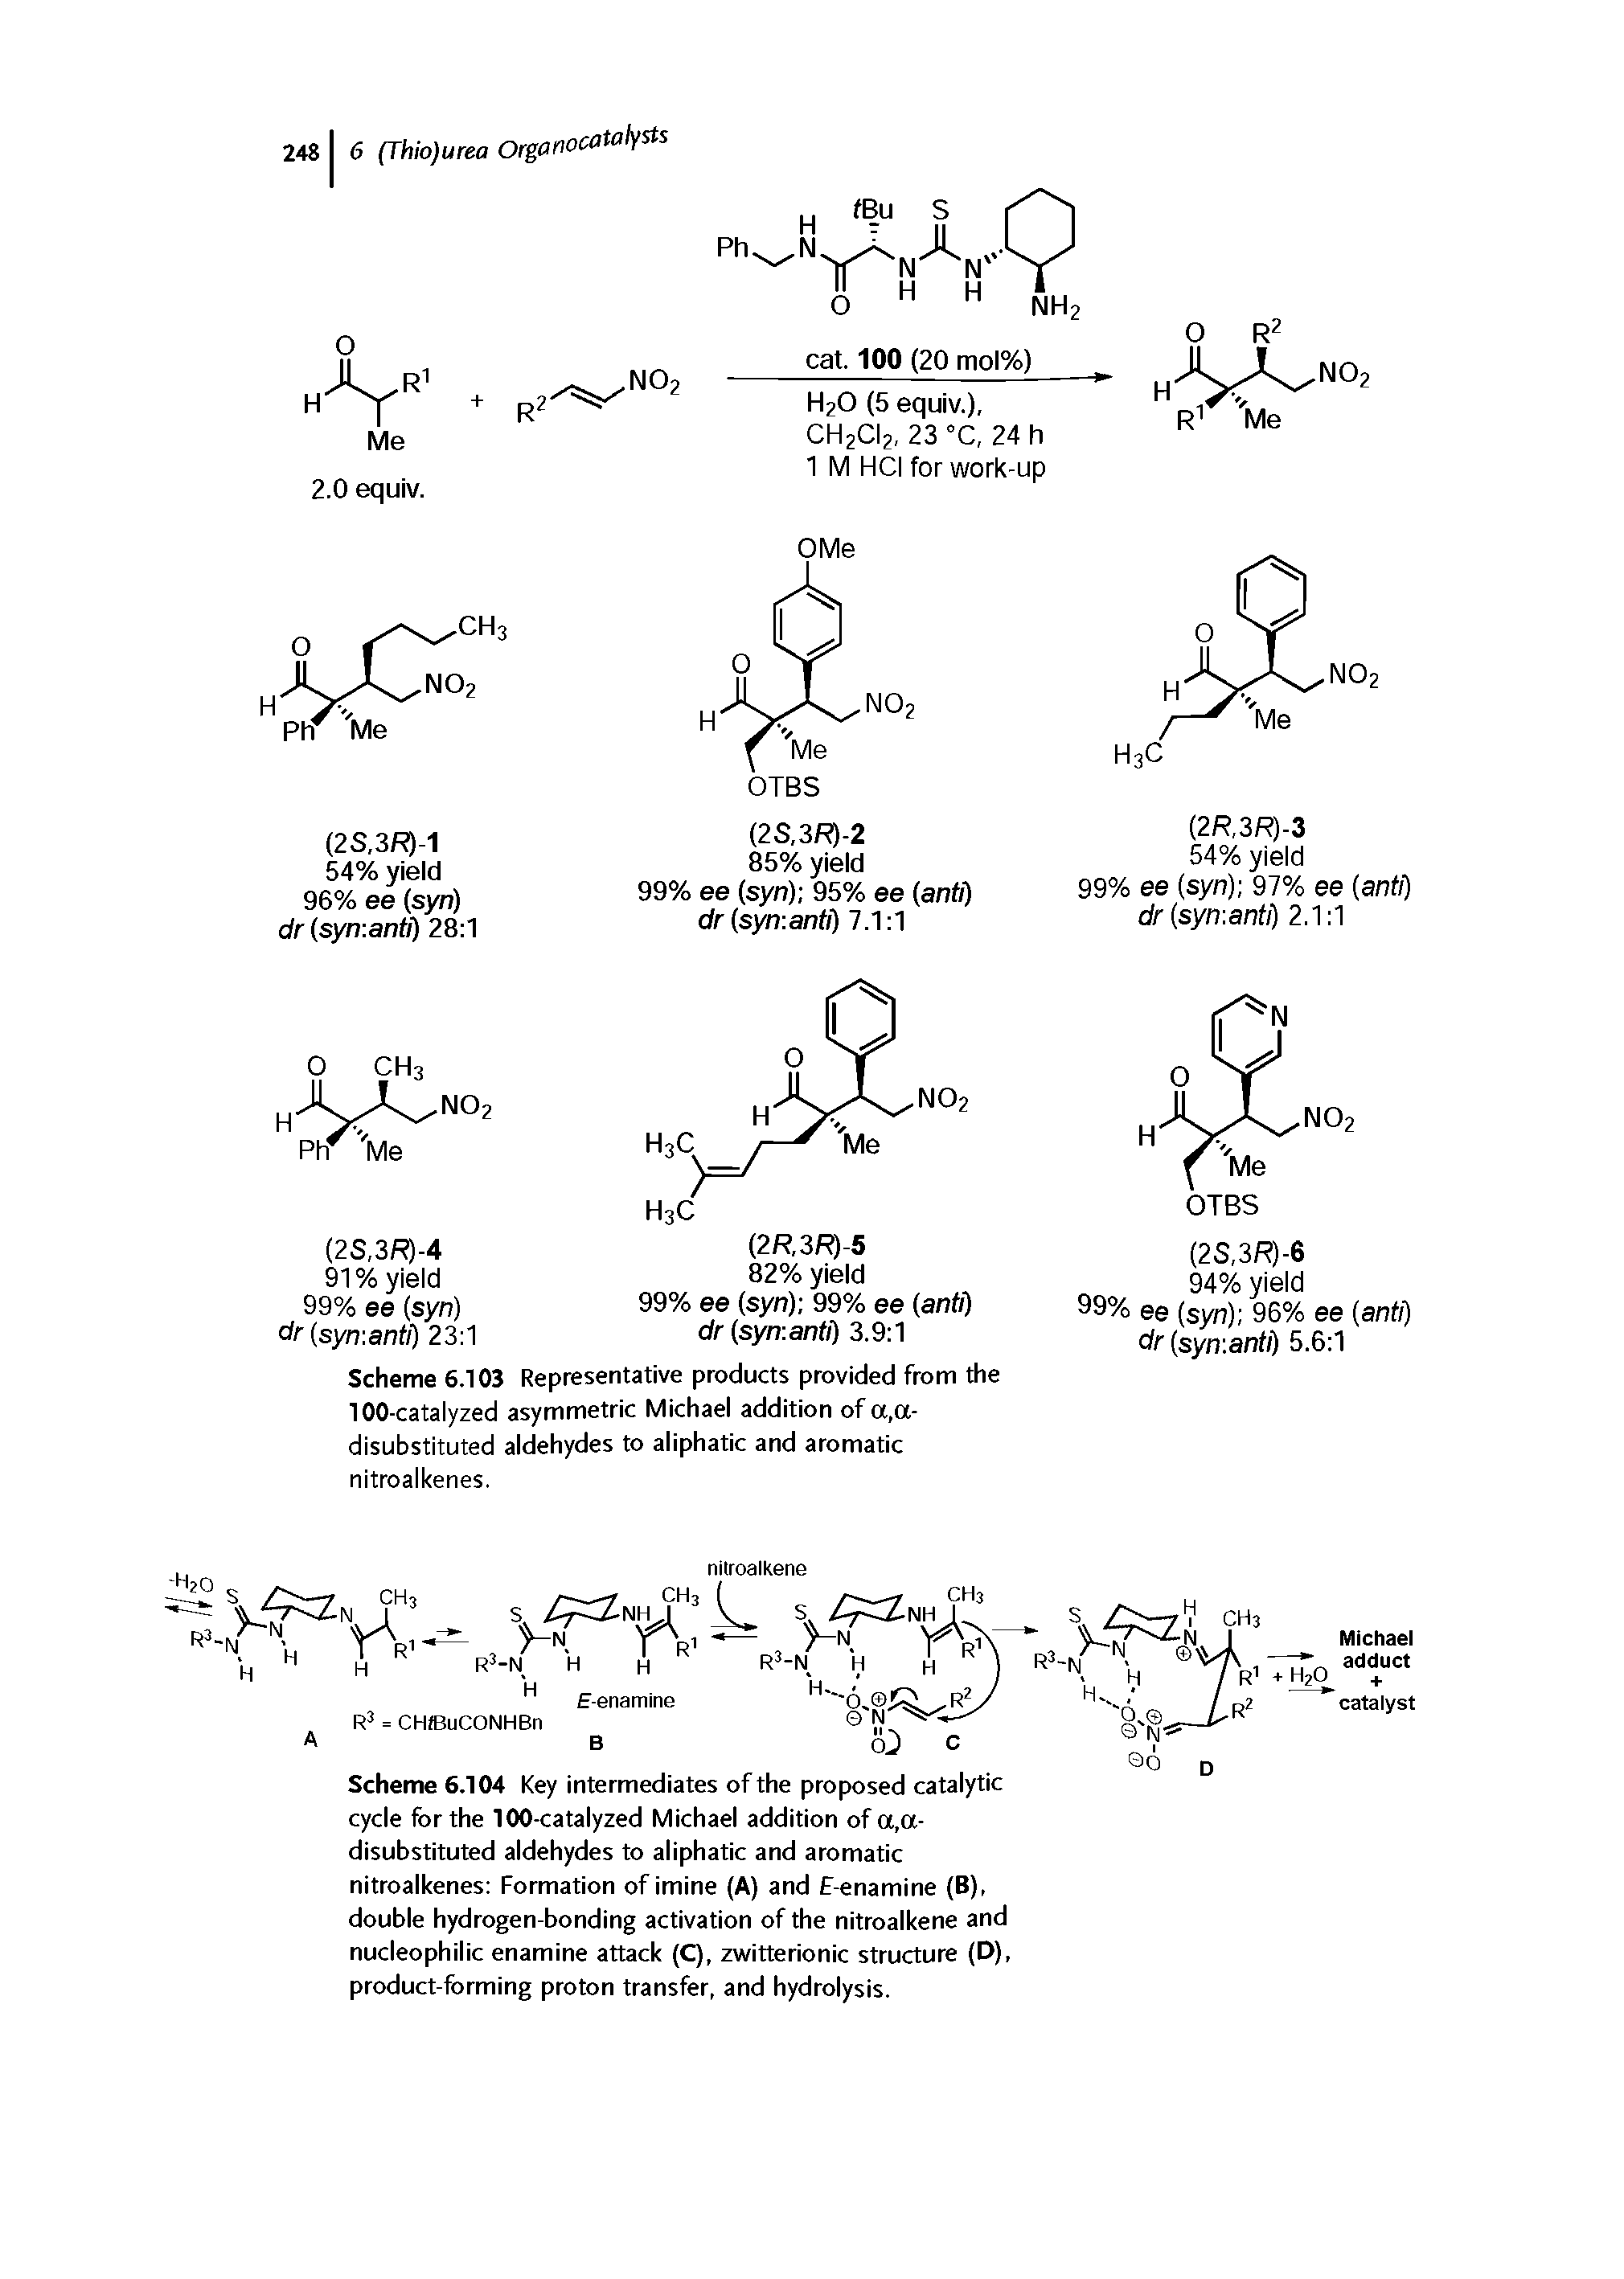 Scheme 6.103 Representative products provided from the 100-catalyzed asymmetric Michael addition of a,a-disubstituted aldehydes to aliphatic and aromatic nitroalkenes.